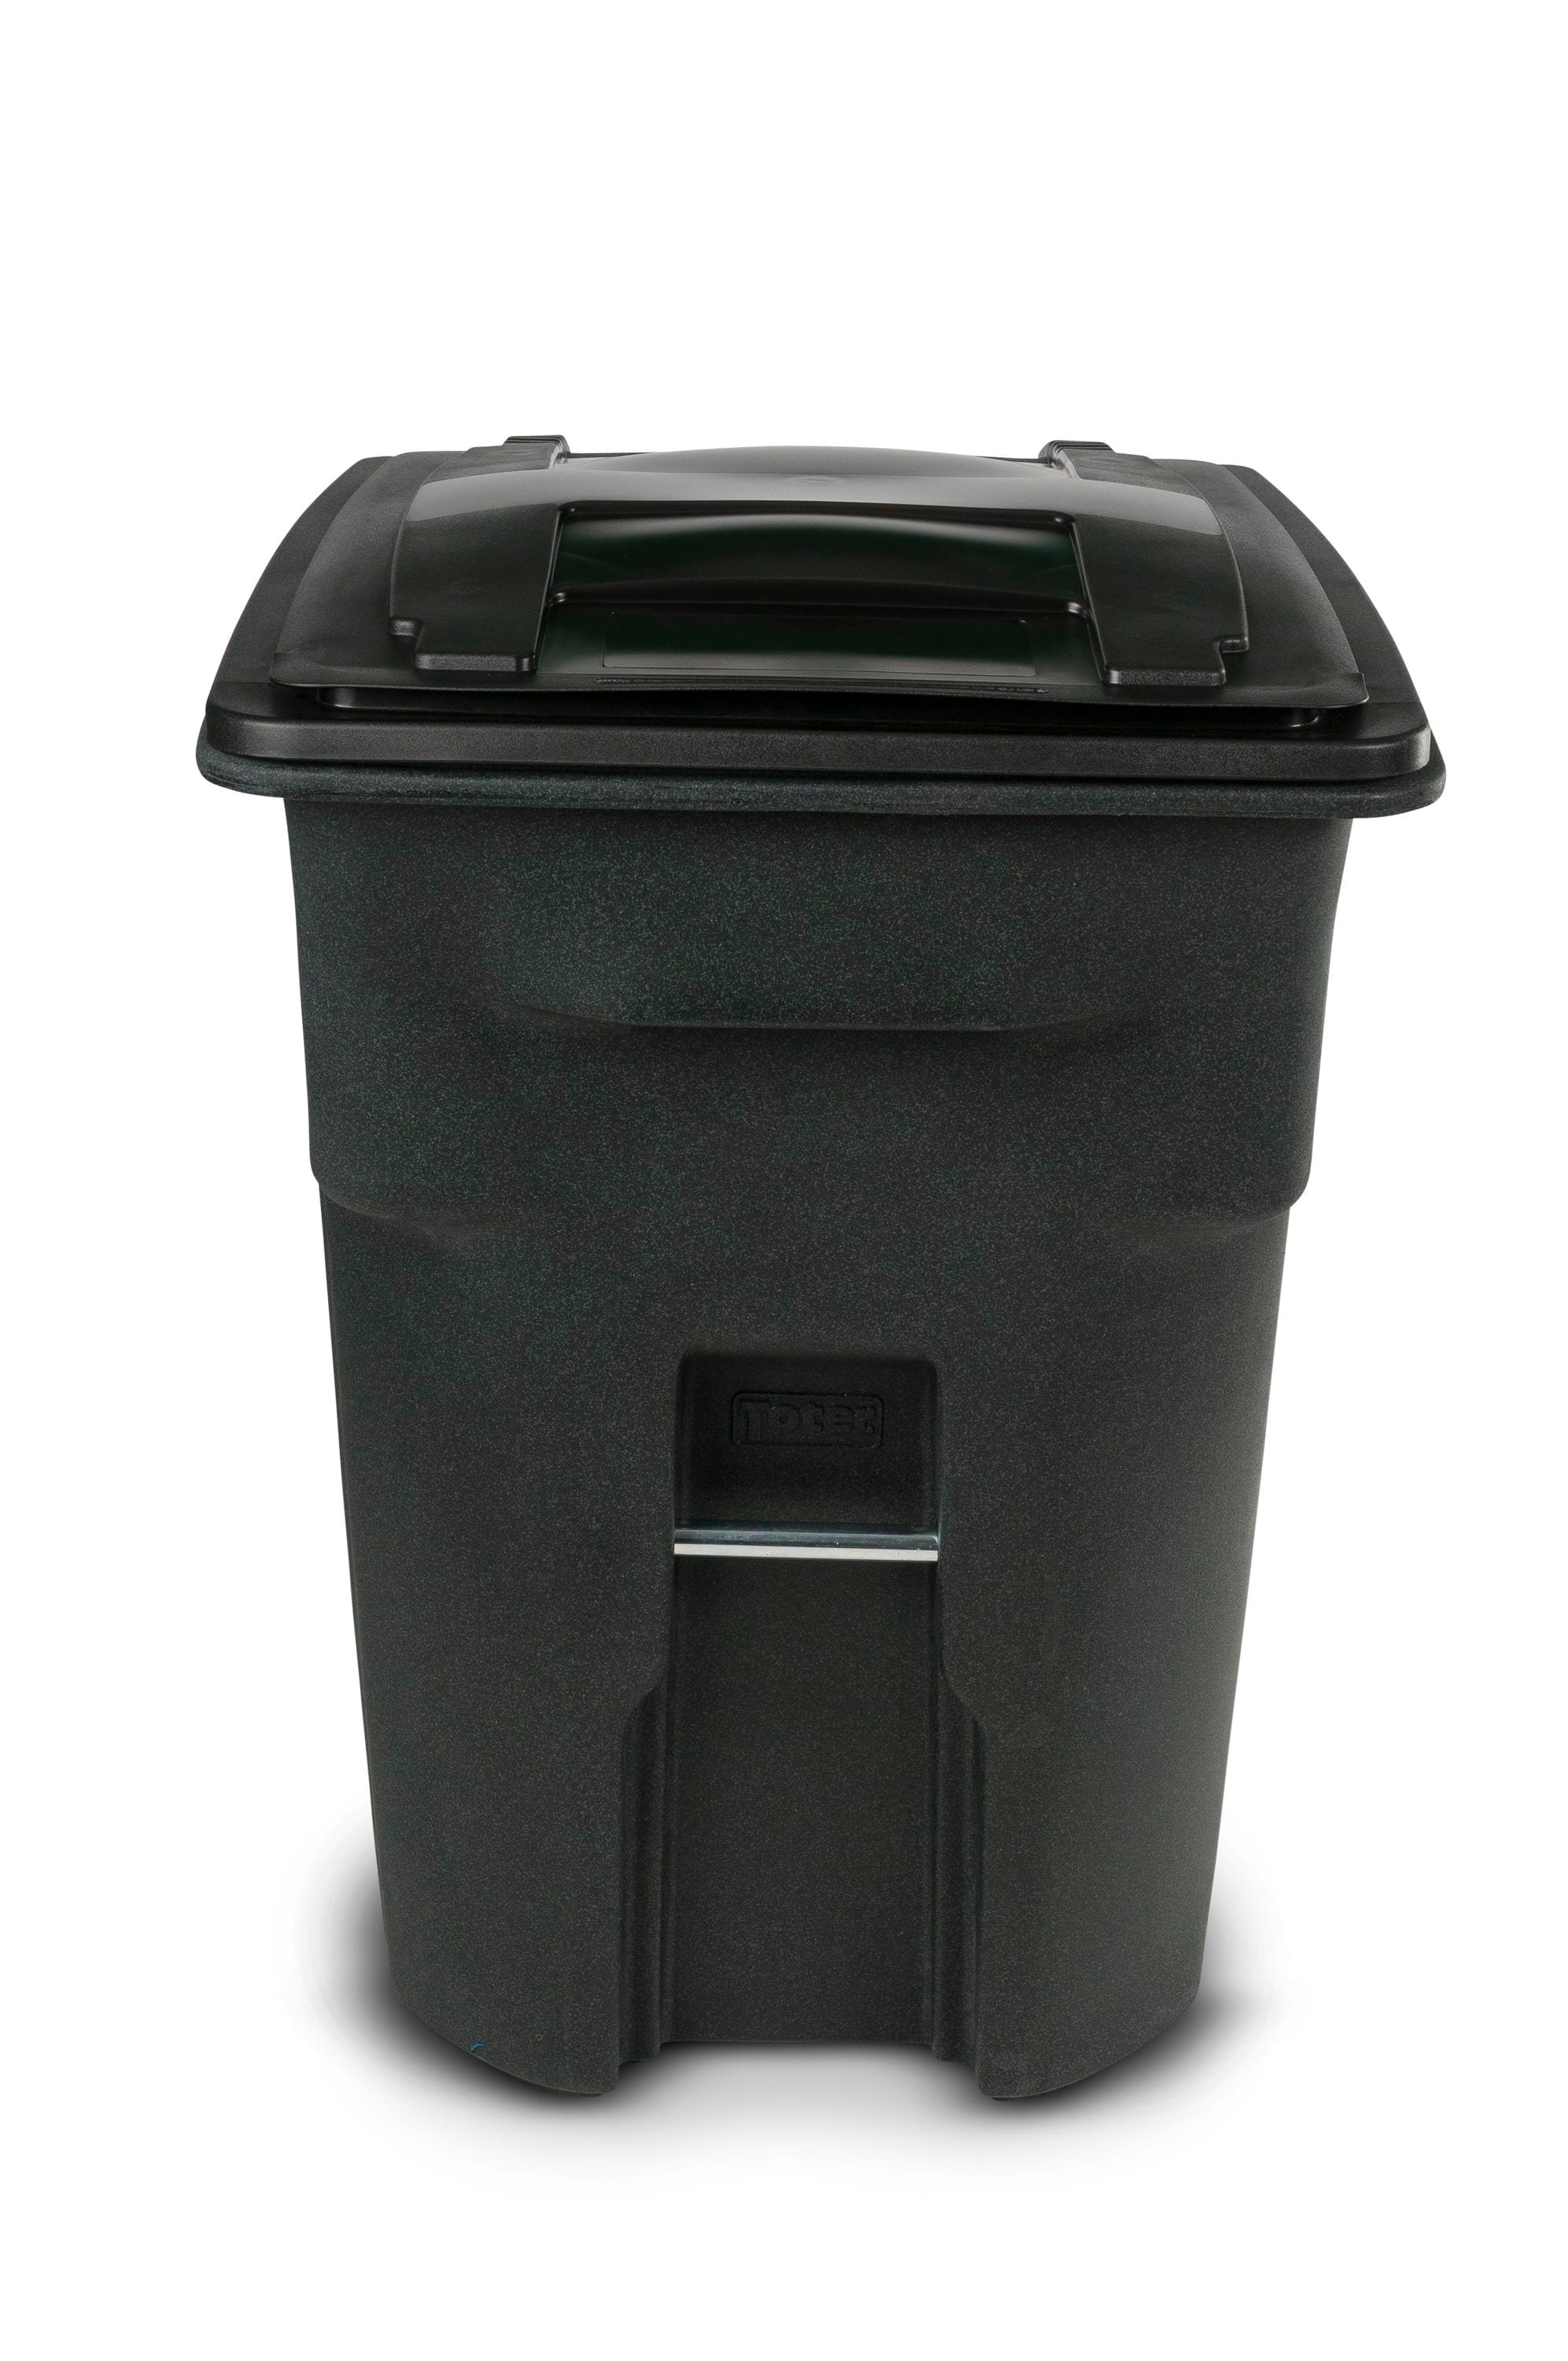 Toter 2-Wheel Trash Can with Lid — Blackstone, 96-Gallon, Model